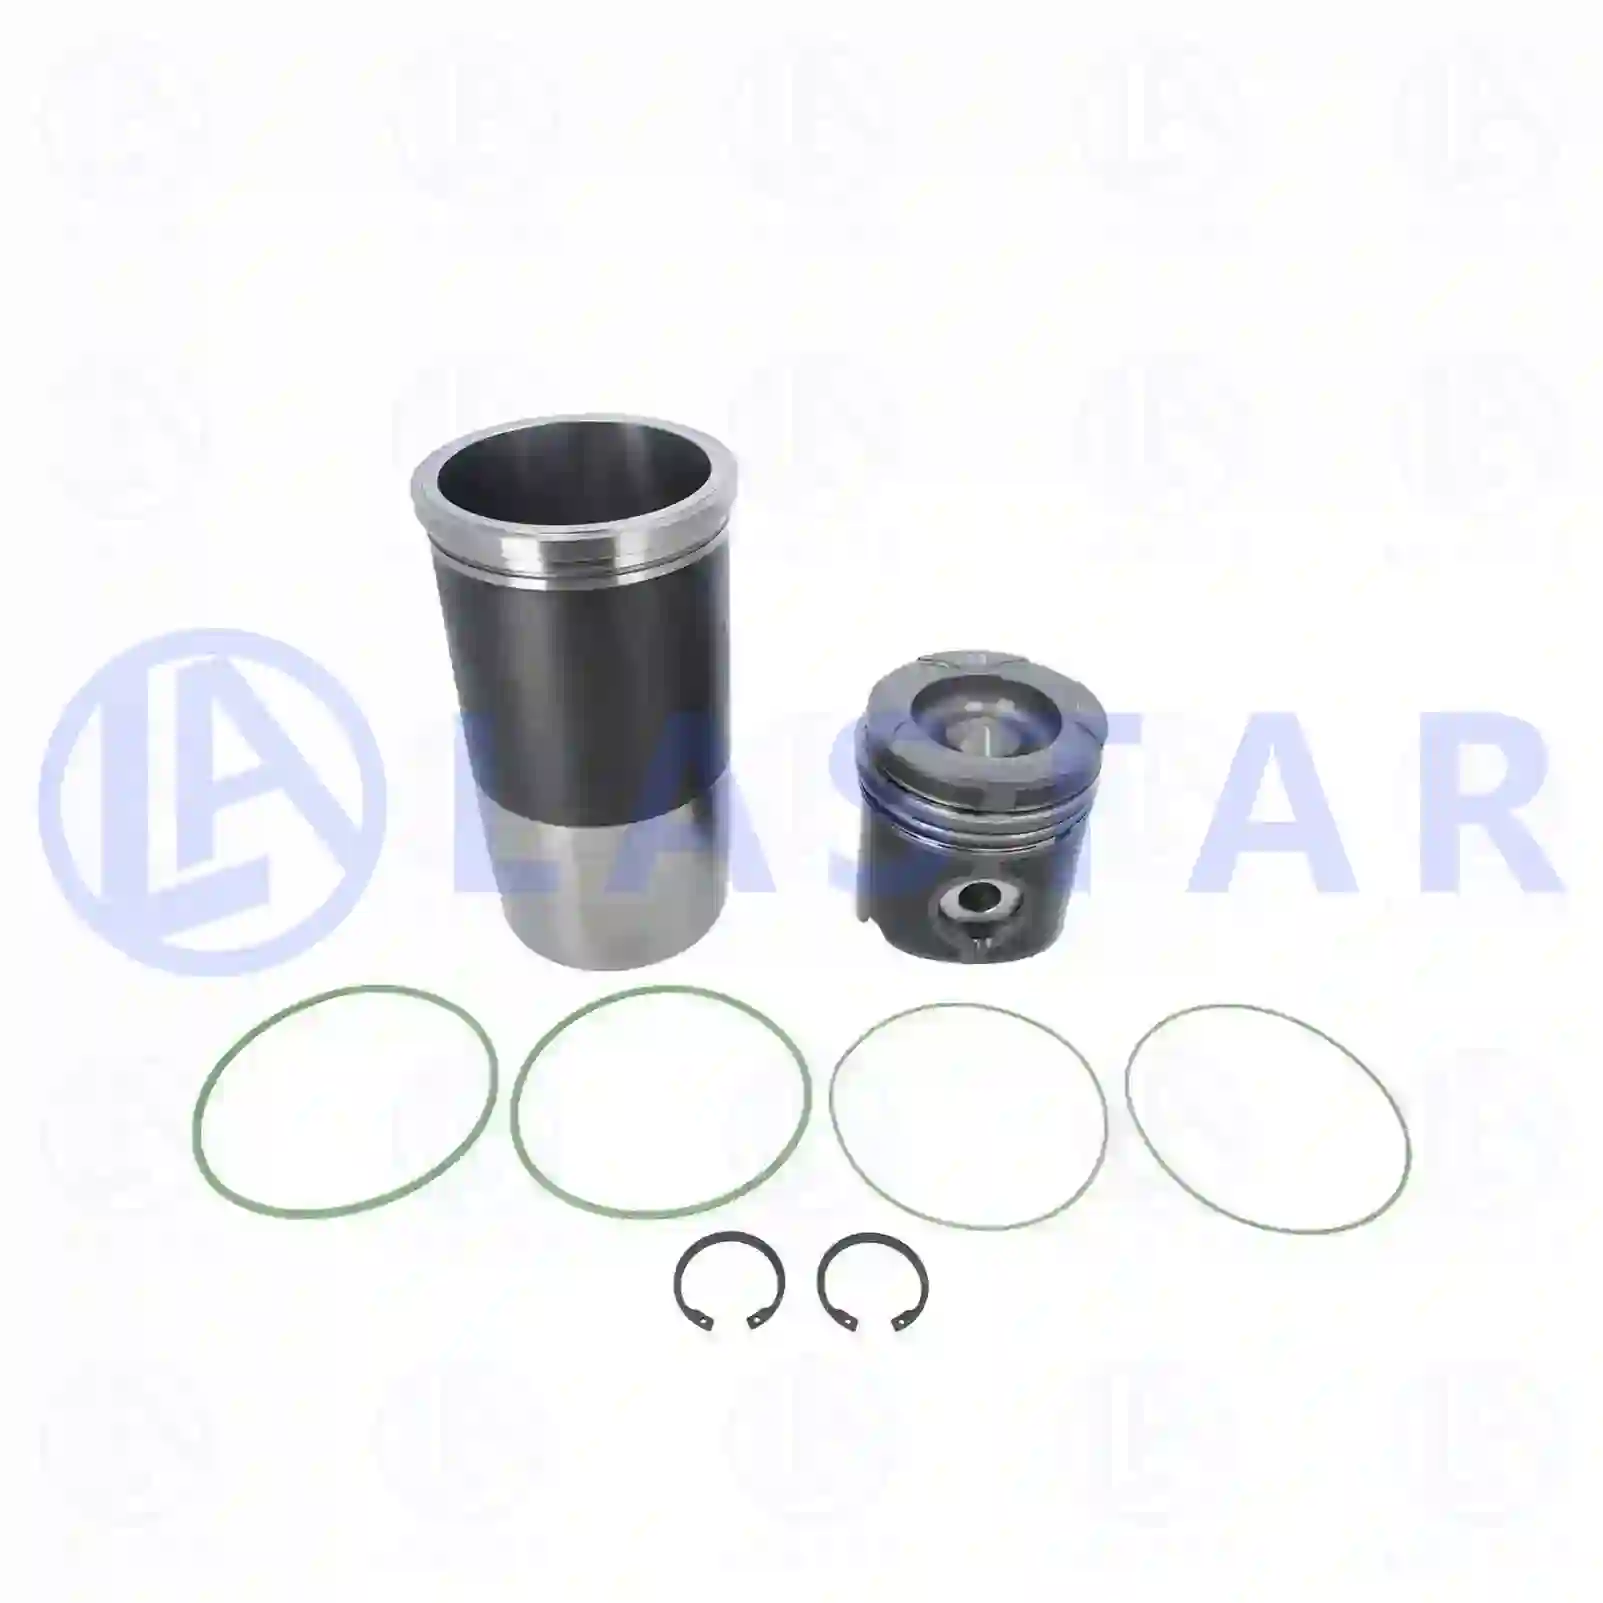 Piston with liner, 77701001, 51025006023S ||  77701001 Lastar Spare Part | Truck Spare Parts, Auotomotive Spare Parts Piston with liner, 77701001, 51025006023S ||  77701001 Lastar Spare Part | Truck Spare Parts, Auotomotive Spare Parts